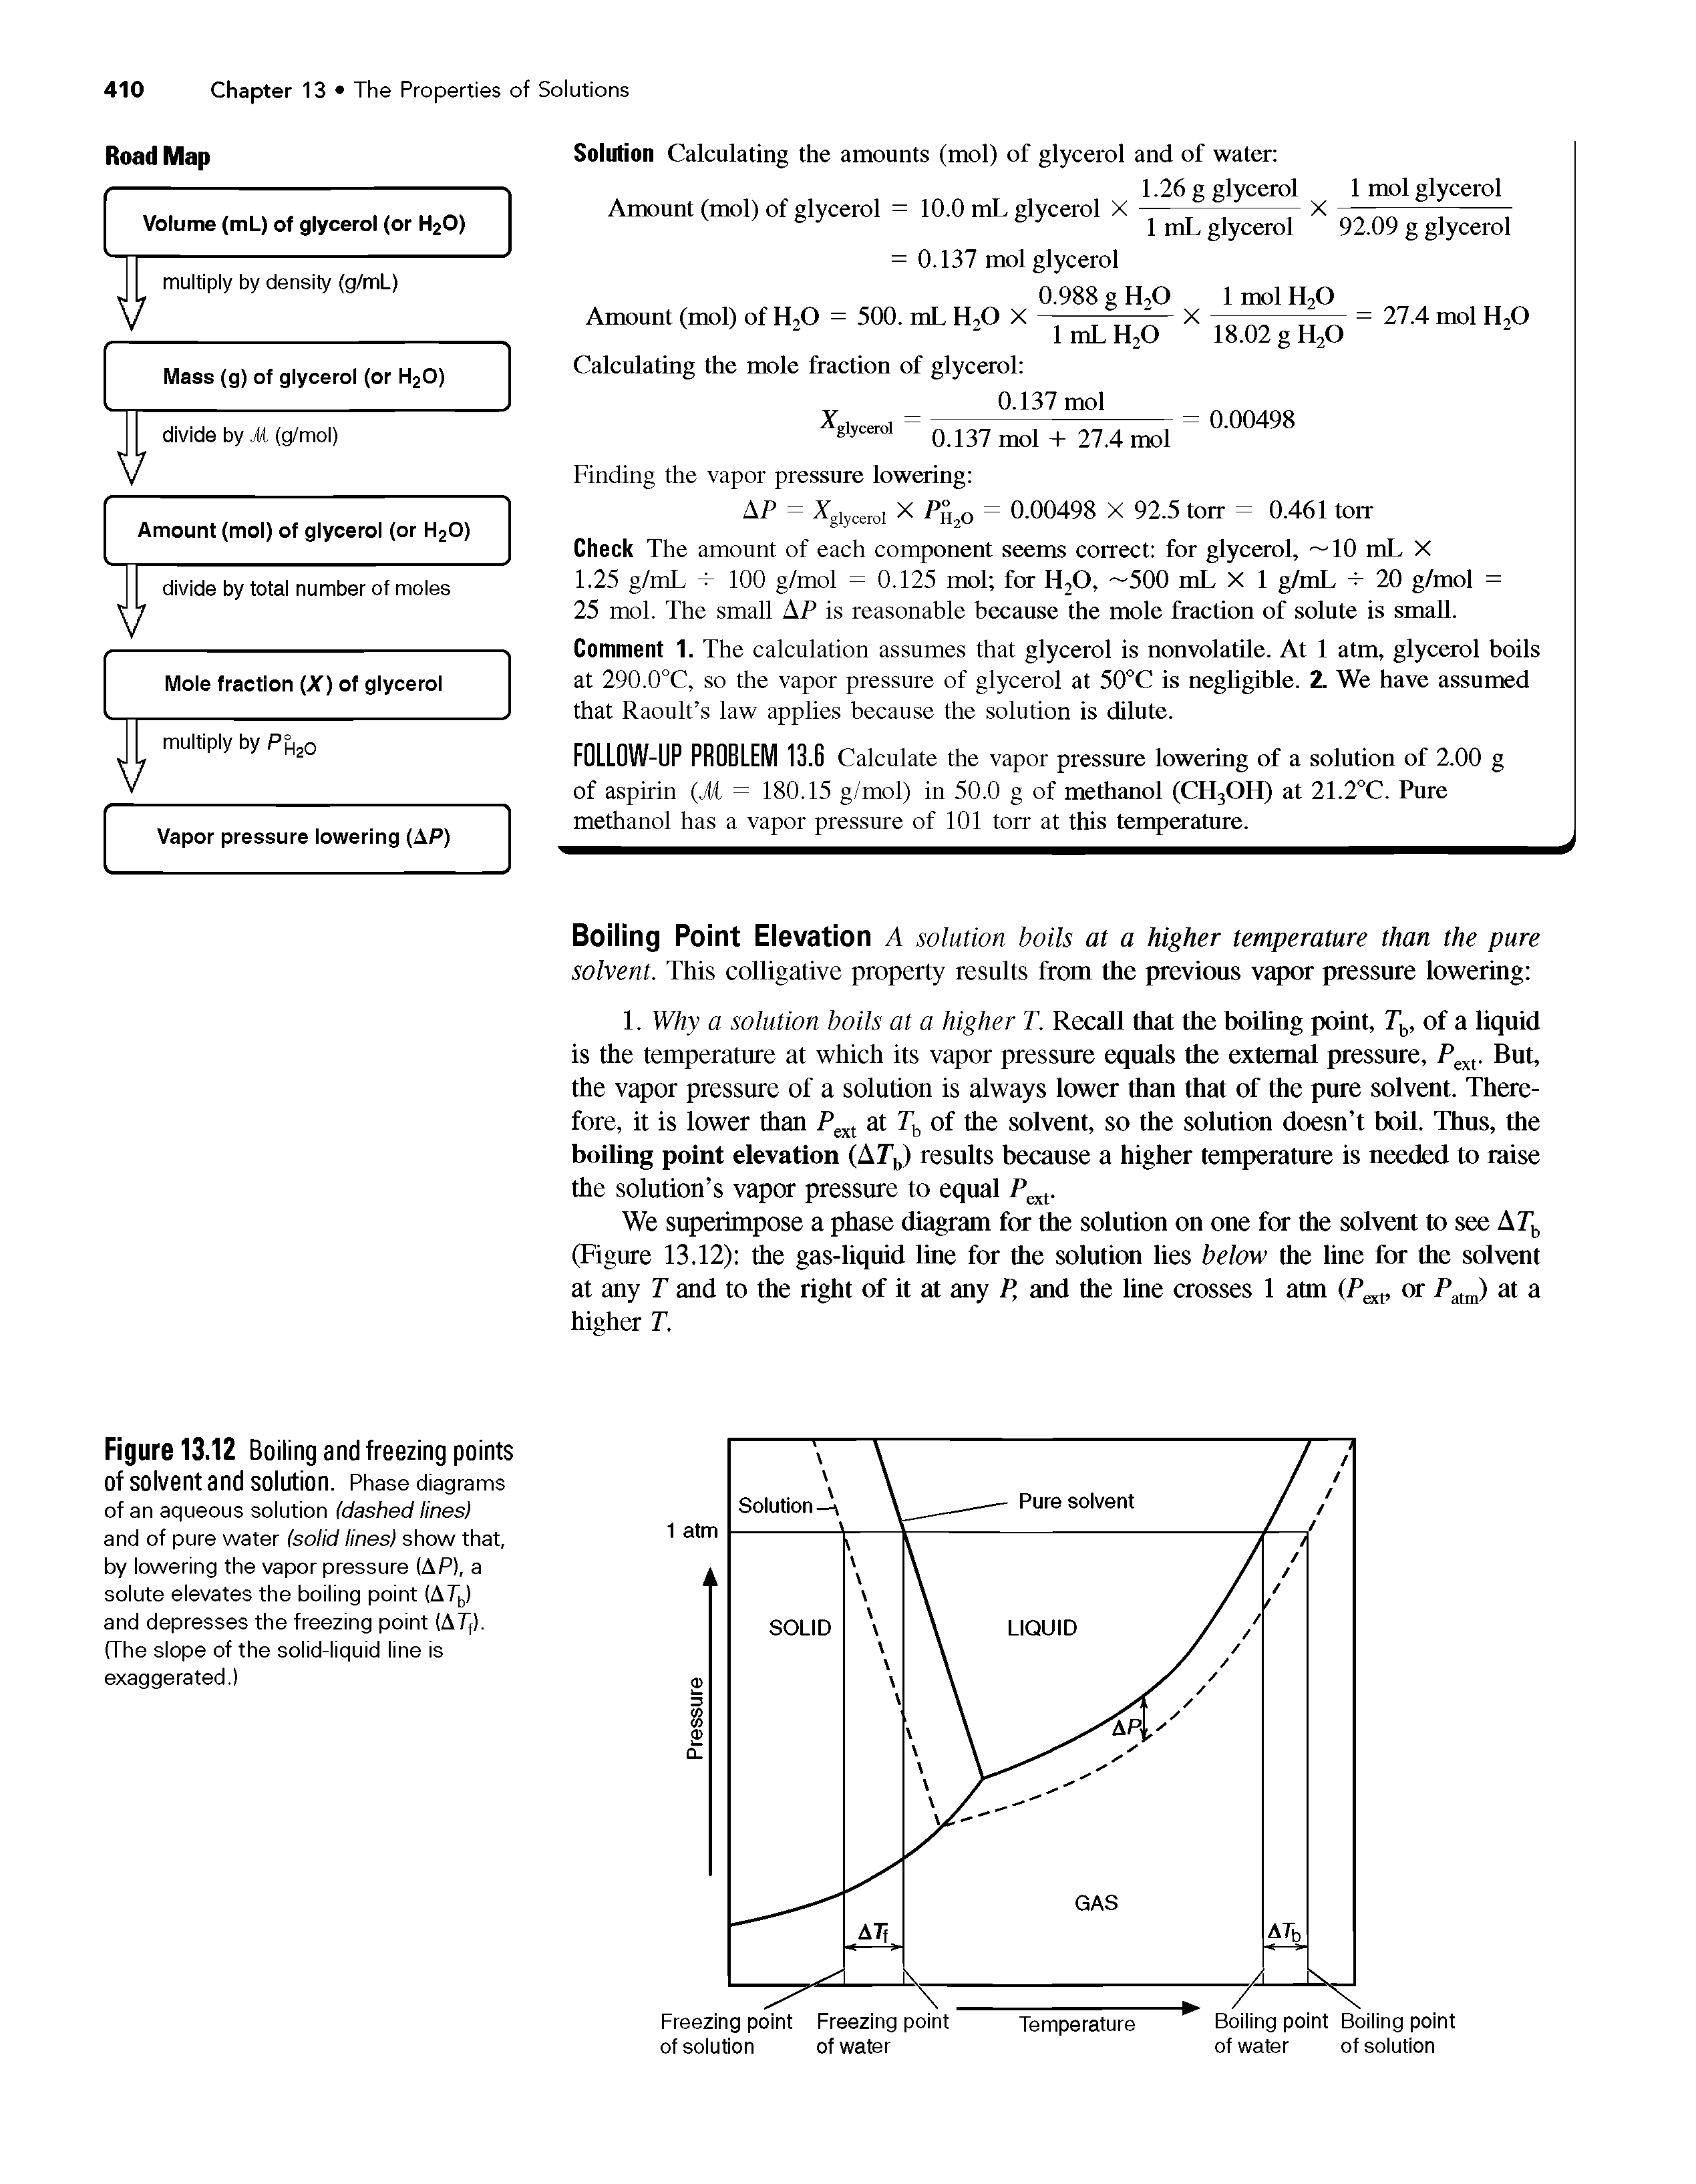 Figure 13.12 Boiling and freezing points of solvent and solution. Phase diagrams of an aqueous solution (dashed lines) and of pure water (solid lines) show that, by lowering the vapor pressure (AP), a solute elevates the boiling point (ATf,) and depresses the freezing point (AT,). (The slope of the solid-liquid line is exaggerated.)...